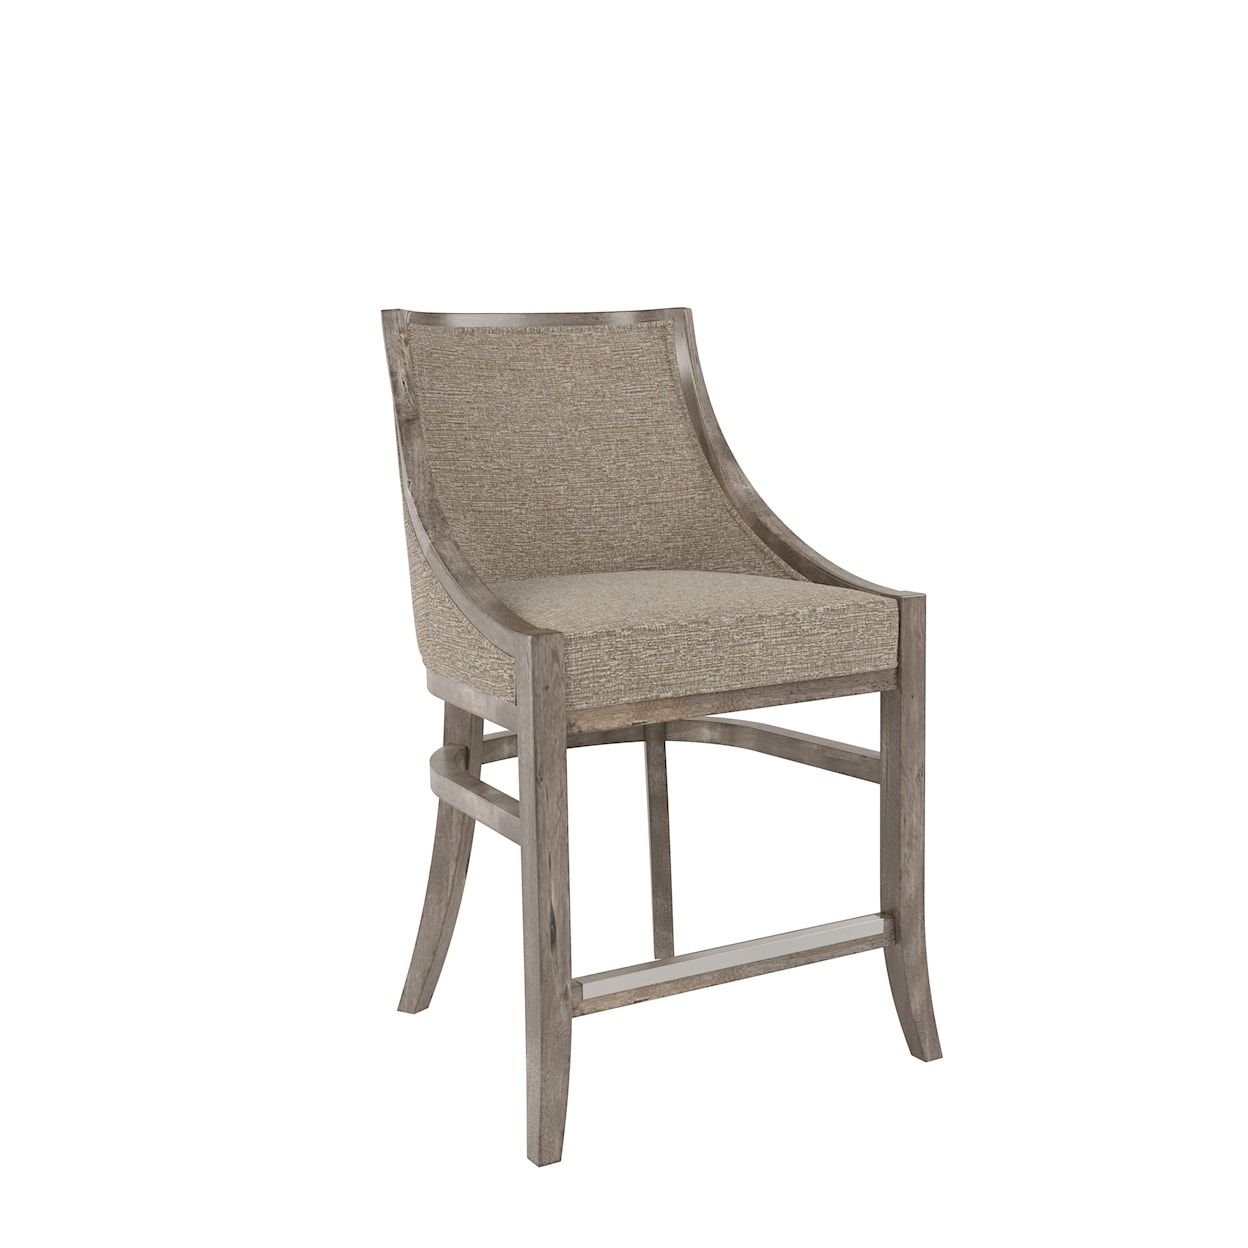 Canadel Champlain Upholstered Fixed Stool